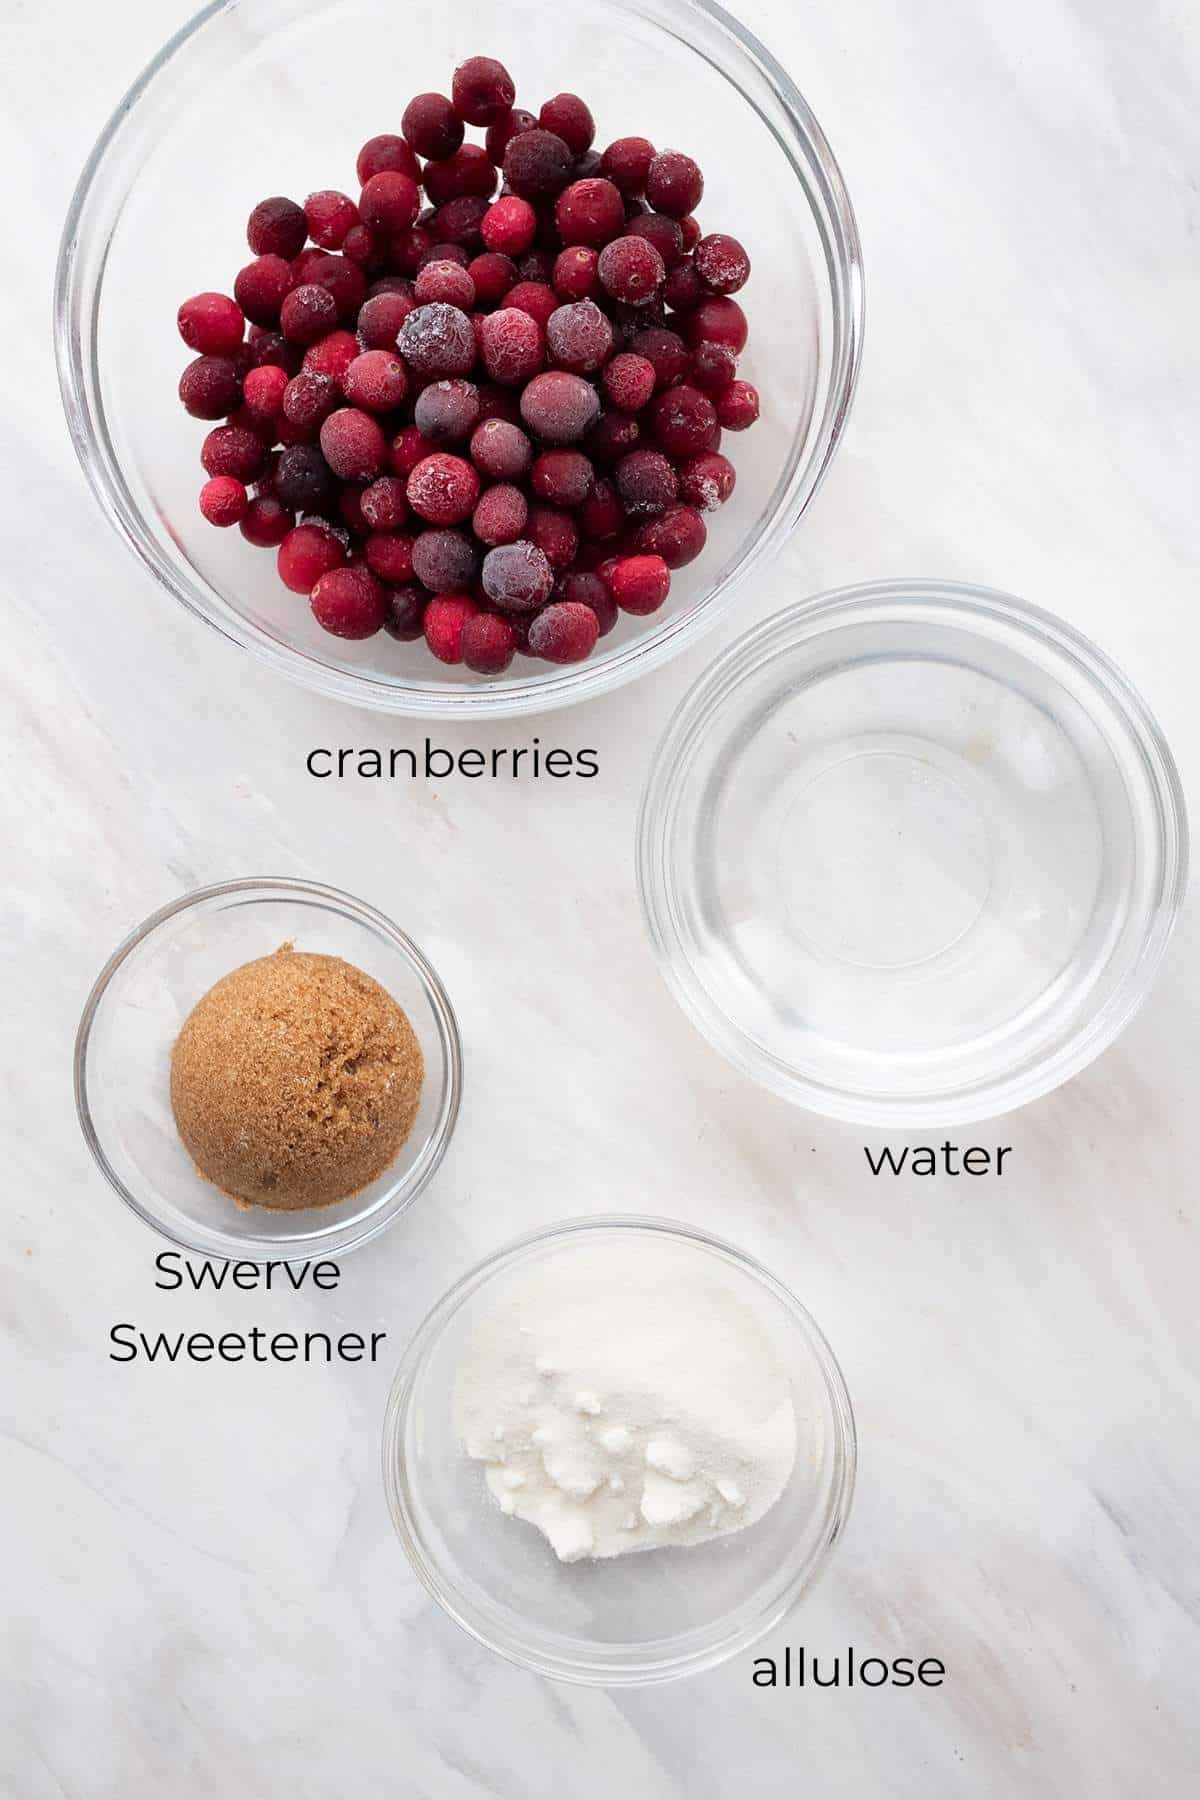 Top down image of ingredients needed for keto cranberry sauce.